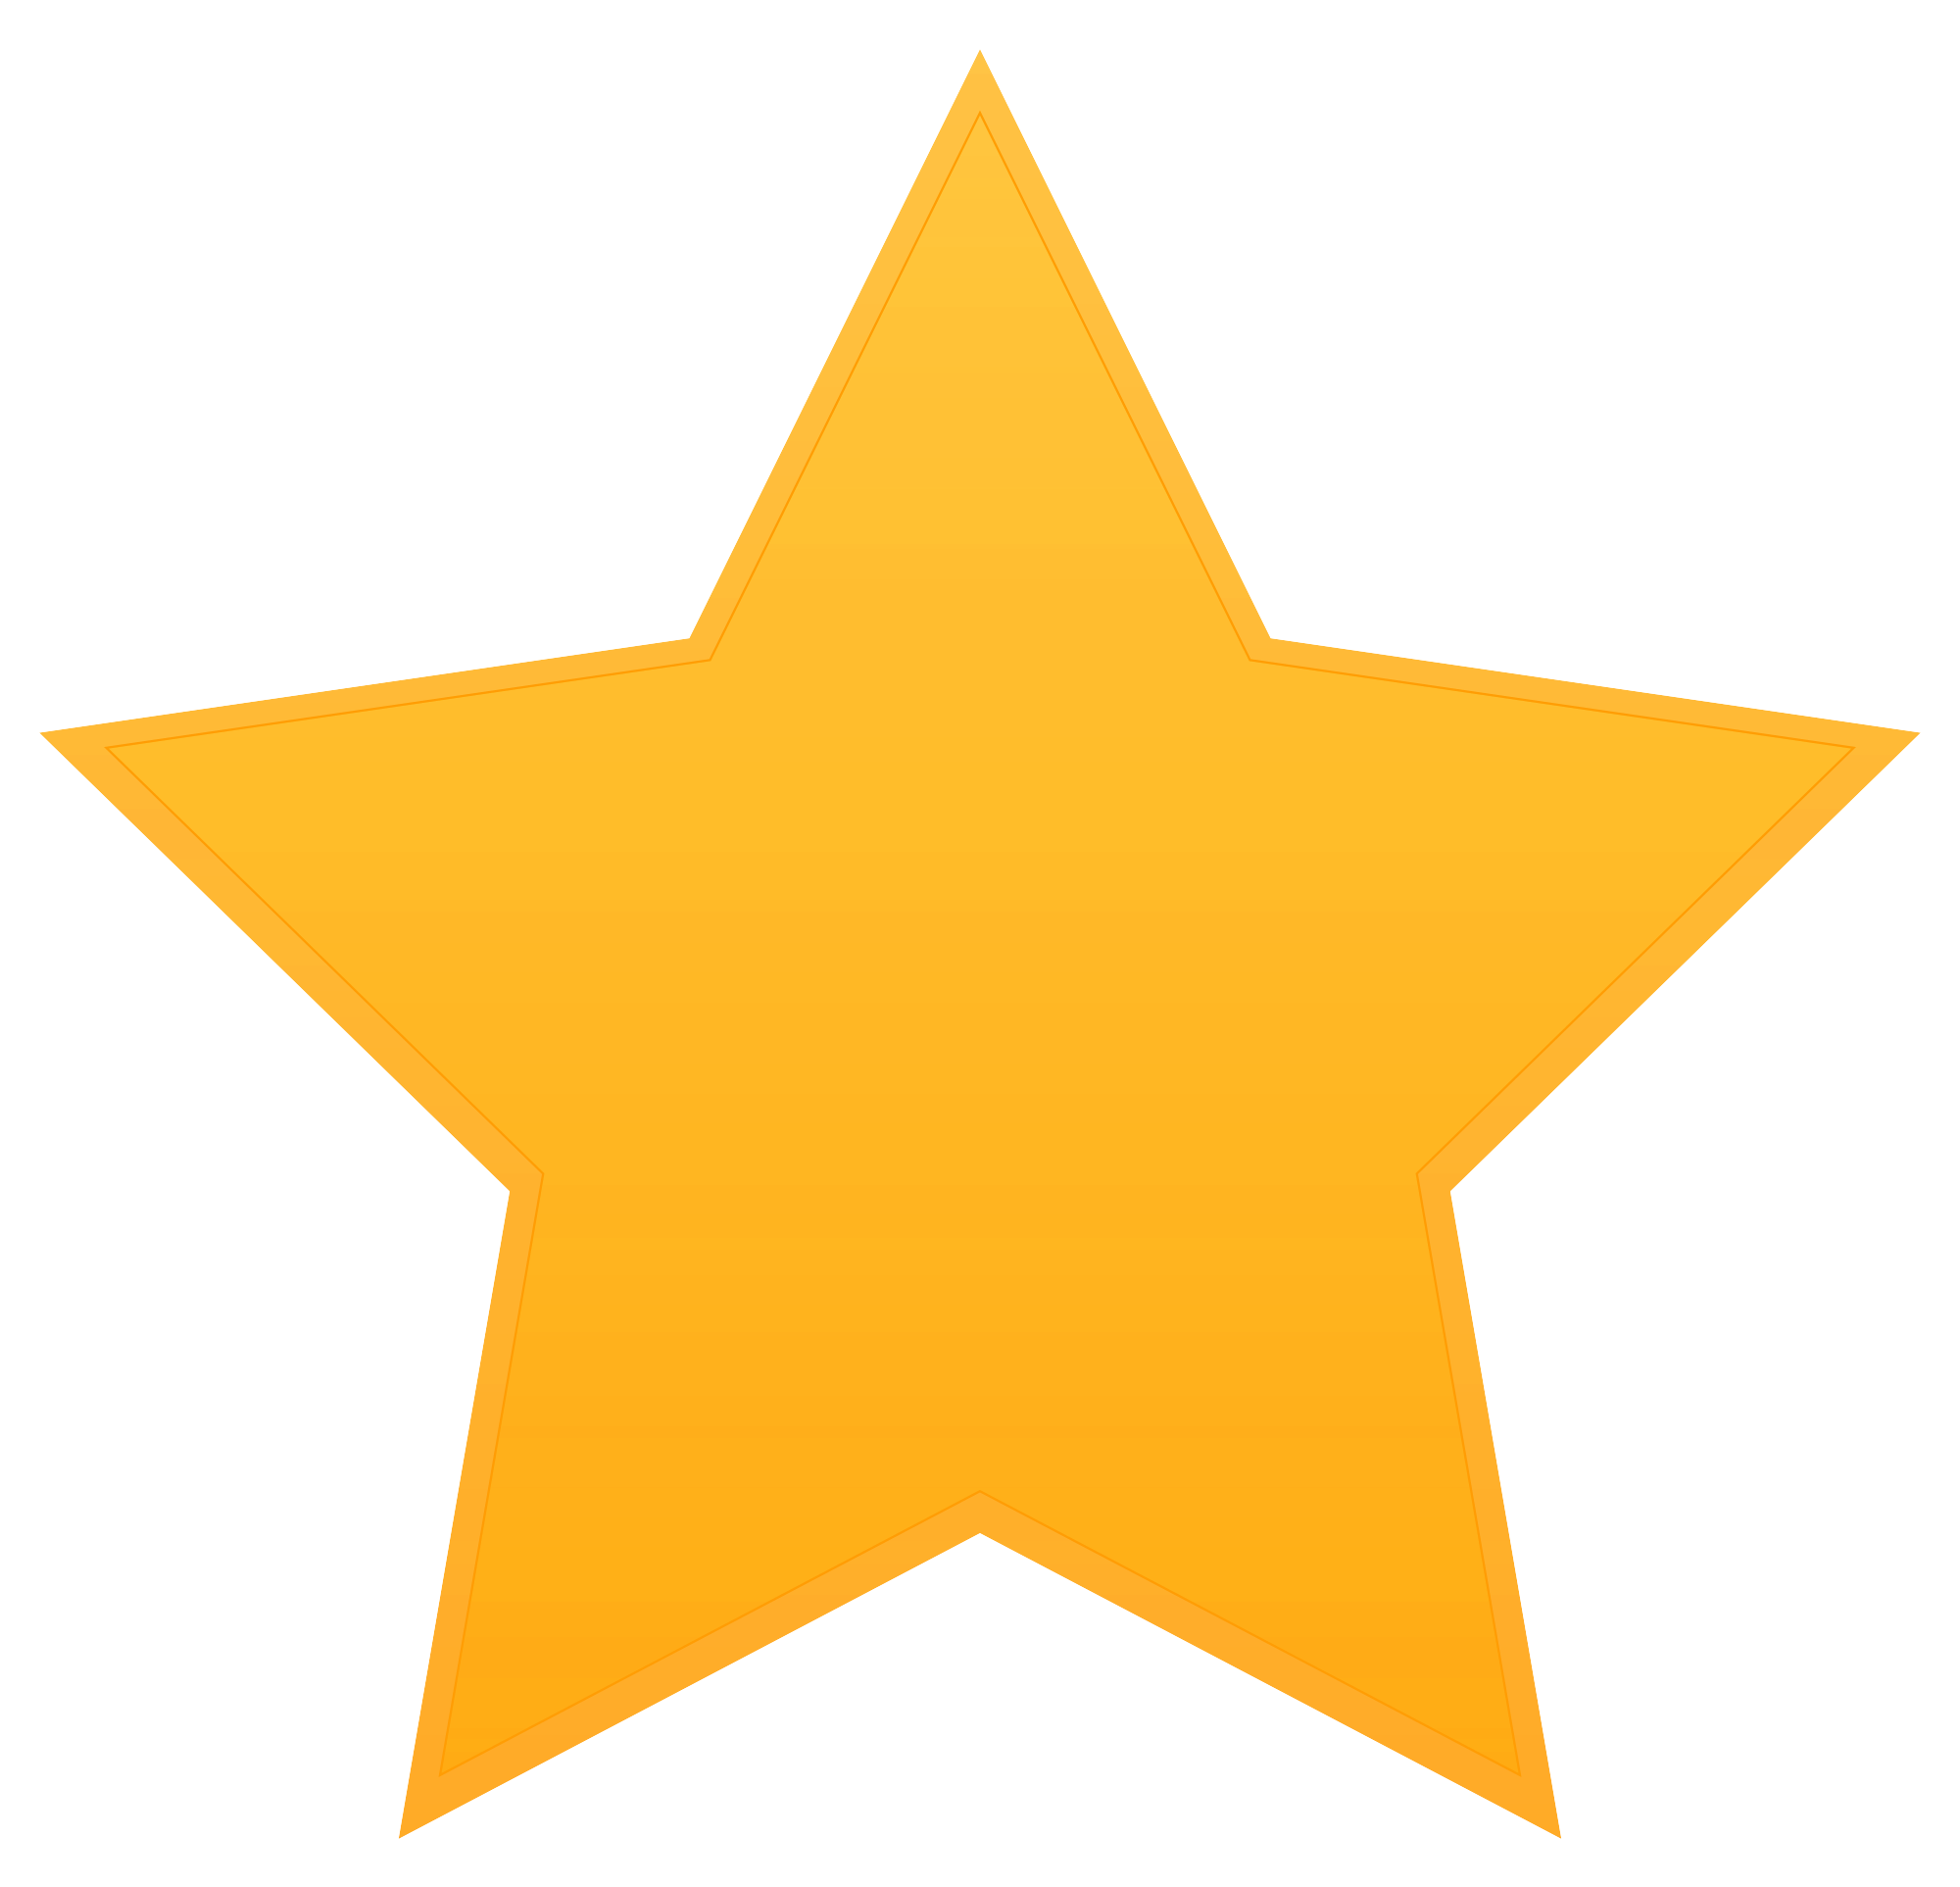 Hq Star Png Transparent Star Png Images Pluspng